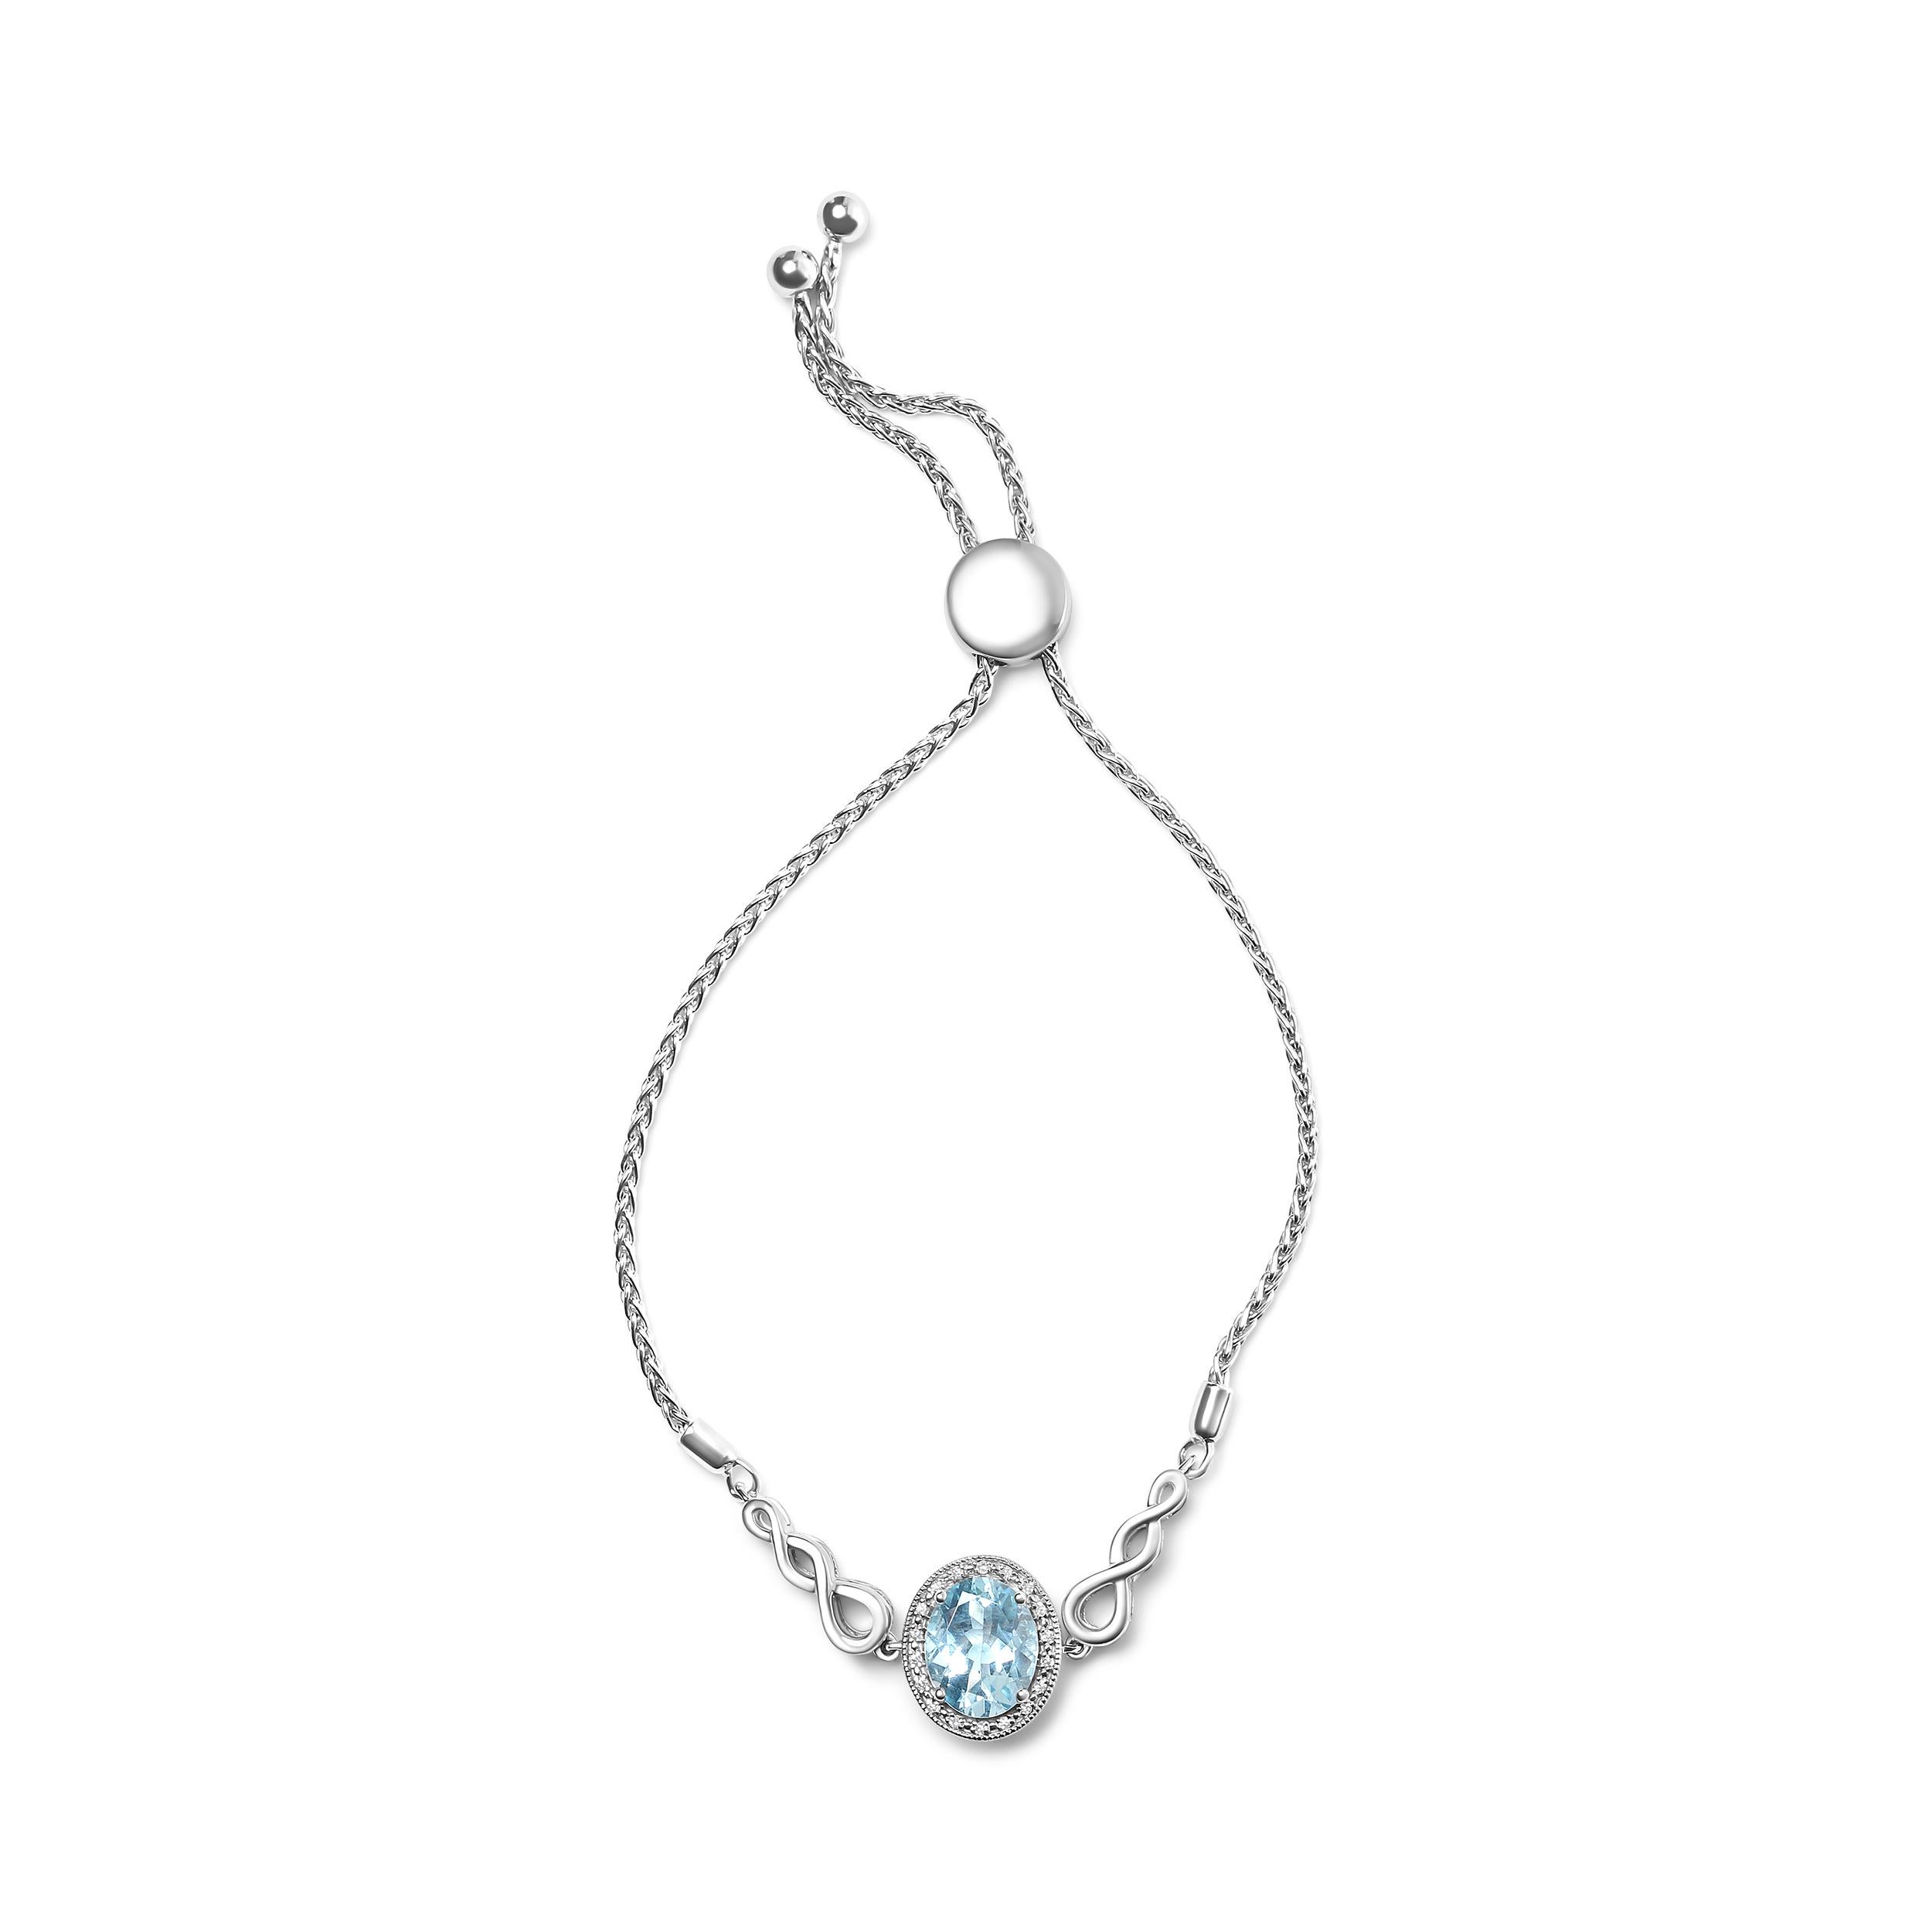 Behold the captivating beauty of this sterling silver lariat bolo bracelet, featuring a stunning 10x8mm oval blue topaz as the centerpiece. The adjustable bolo design, ranging from 4”-10”, ensures a perfect fit on any wrist size. Natural,